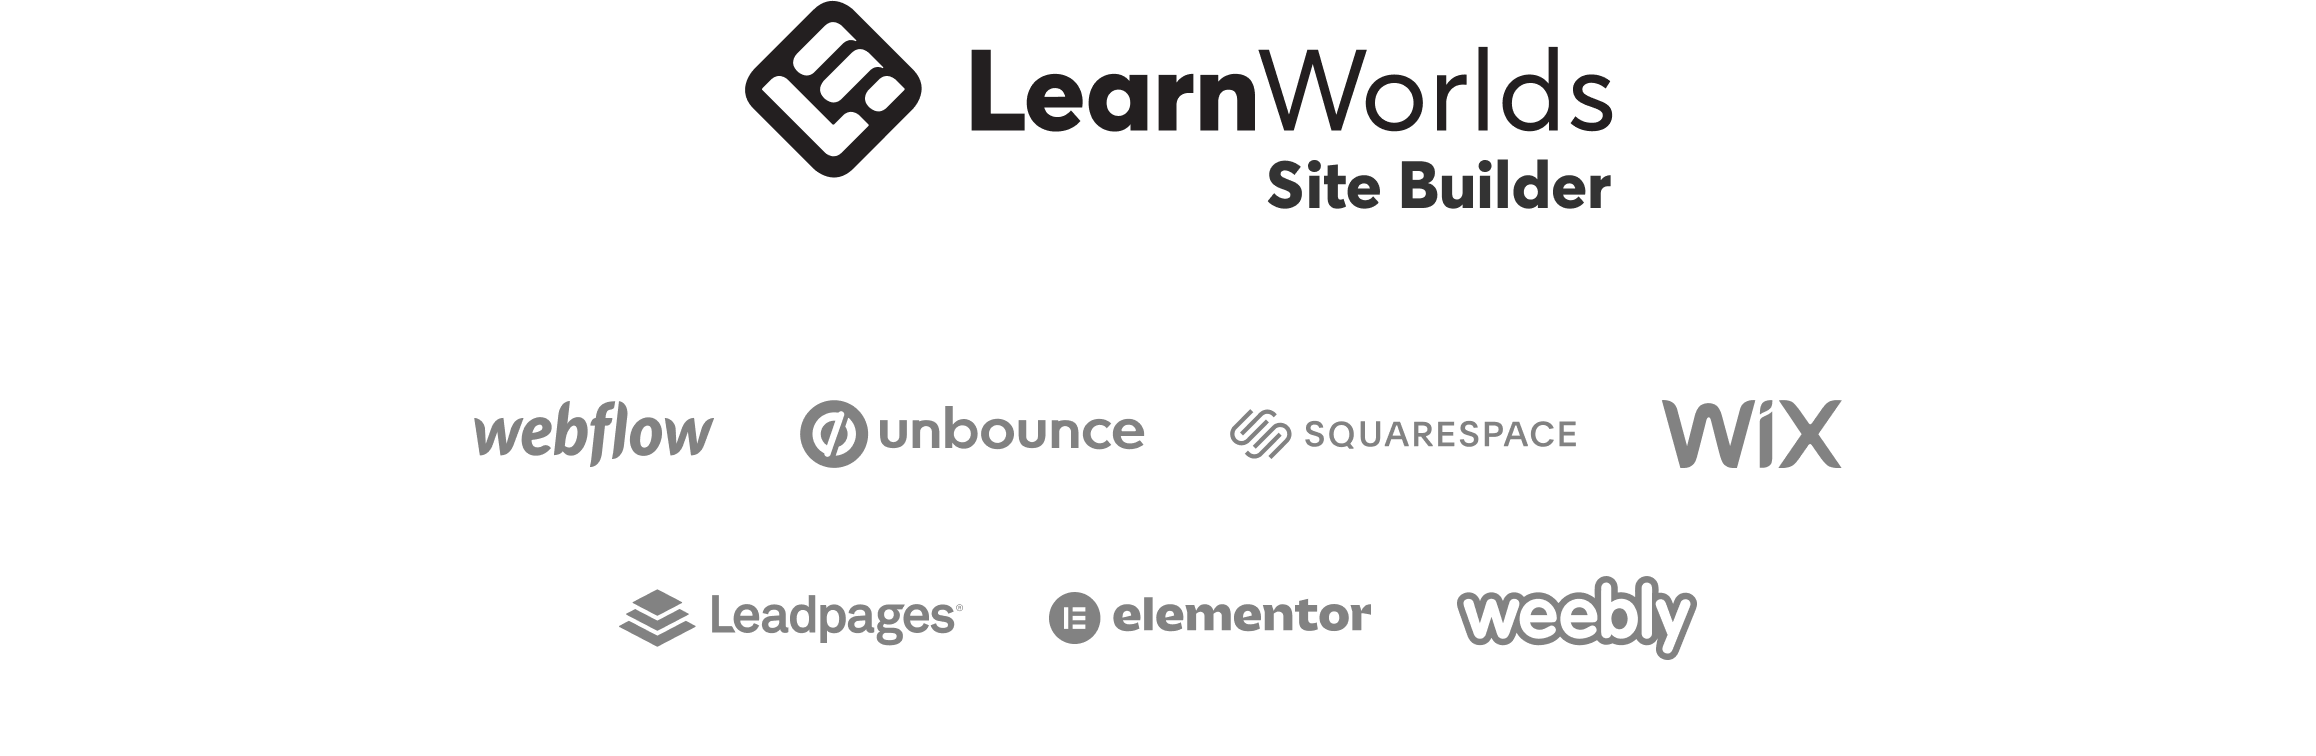 LearnWorlds's Site Builder can replace services like webflow, unbounce, wix, squarespace, elementor, leadpages, weebly and more.